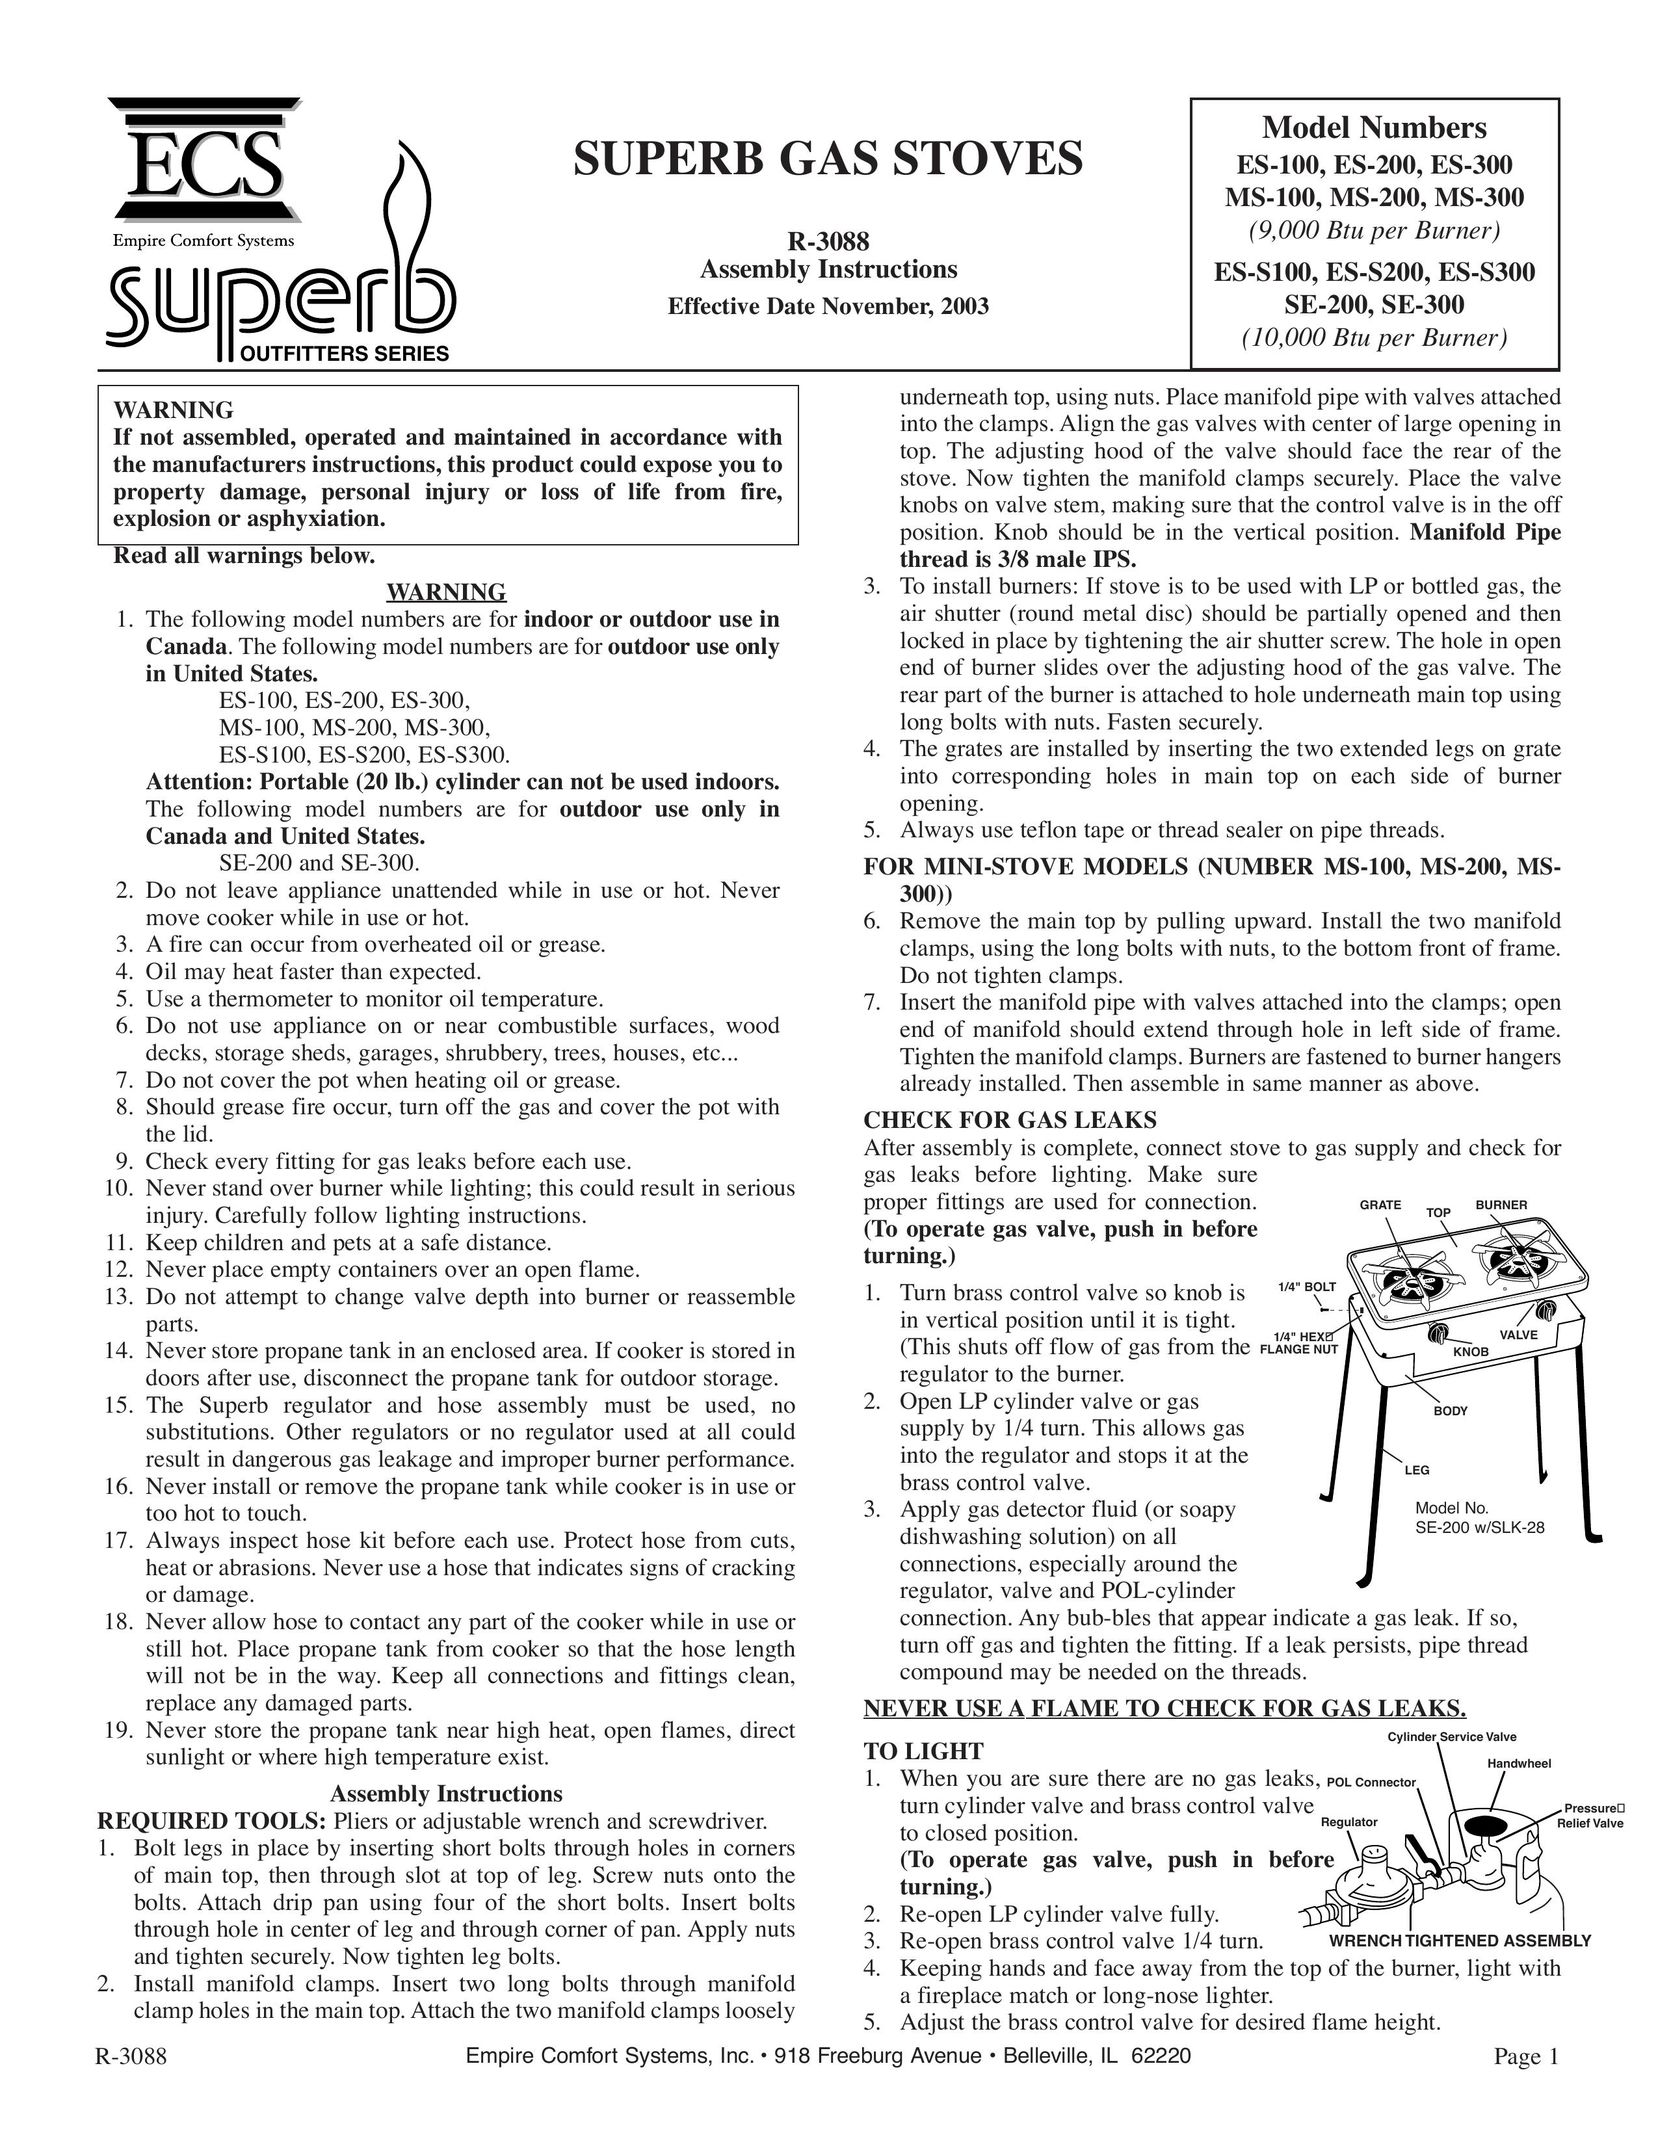 Empire Comfort Systems MS-200 Stove User Manual